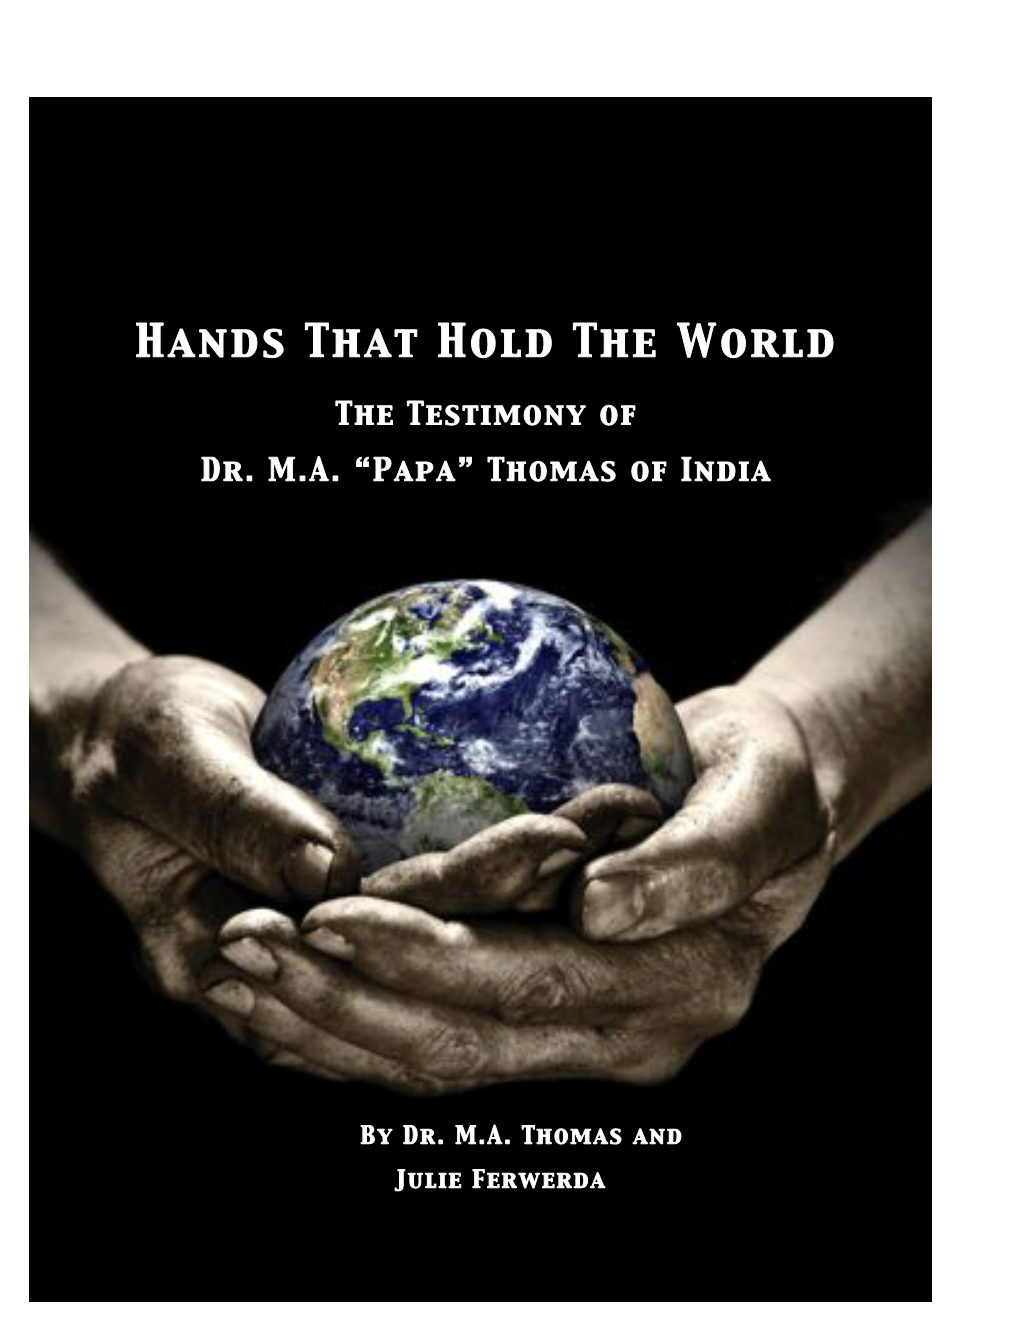 Hands That Hold the World2